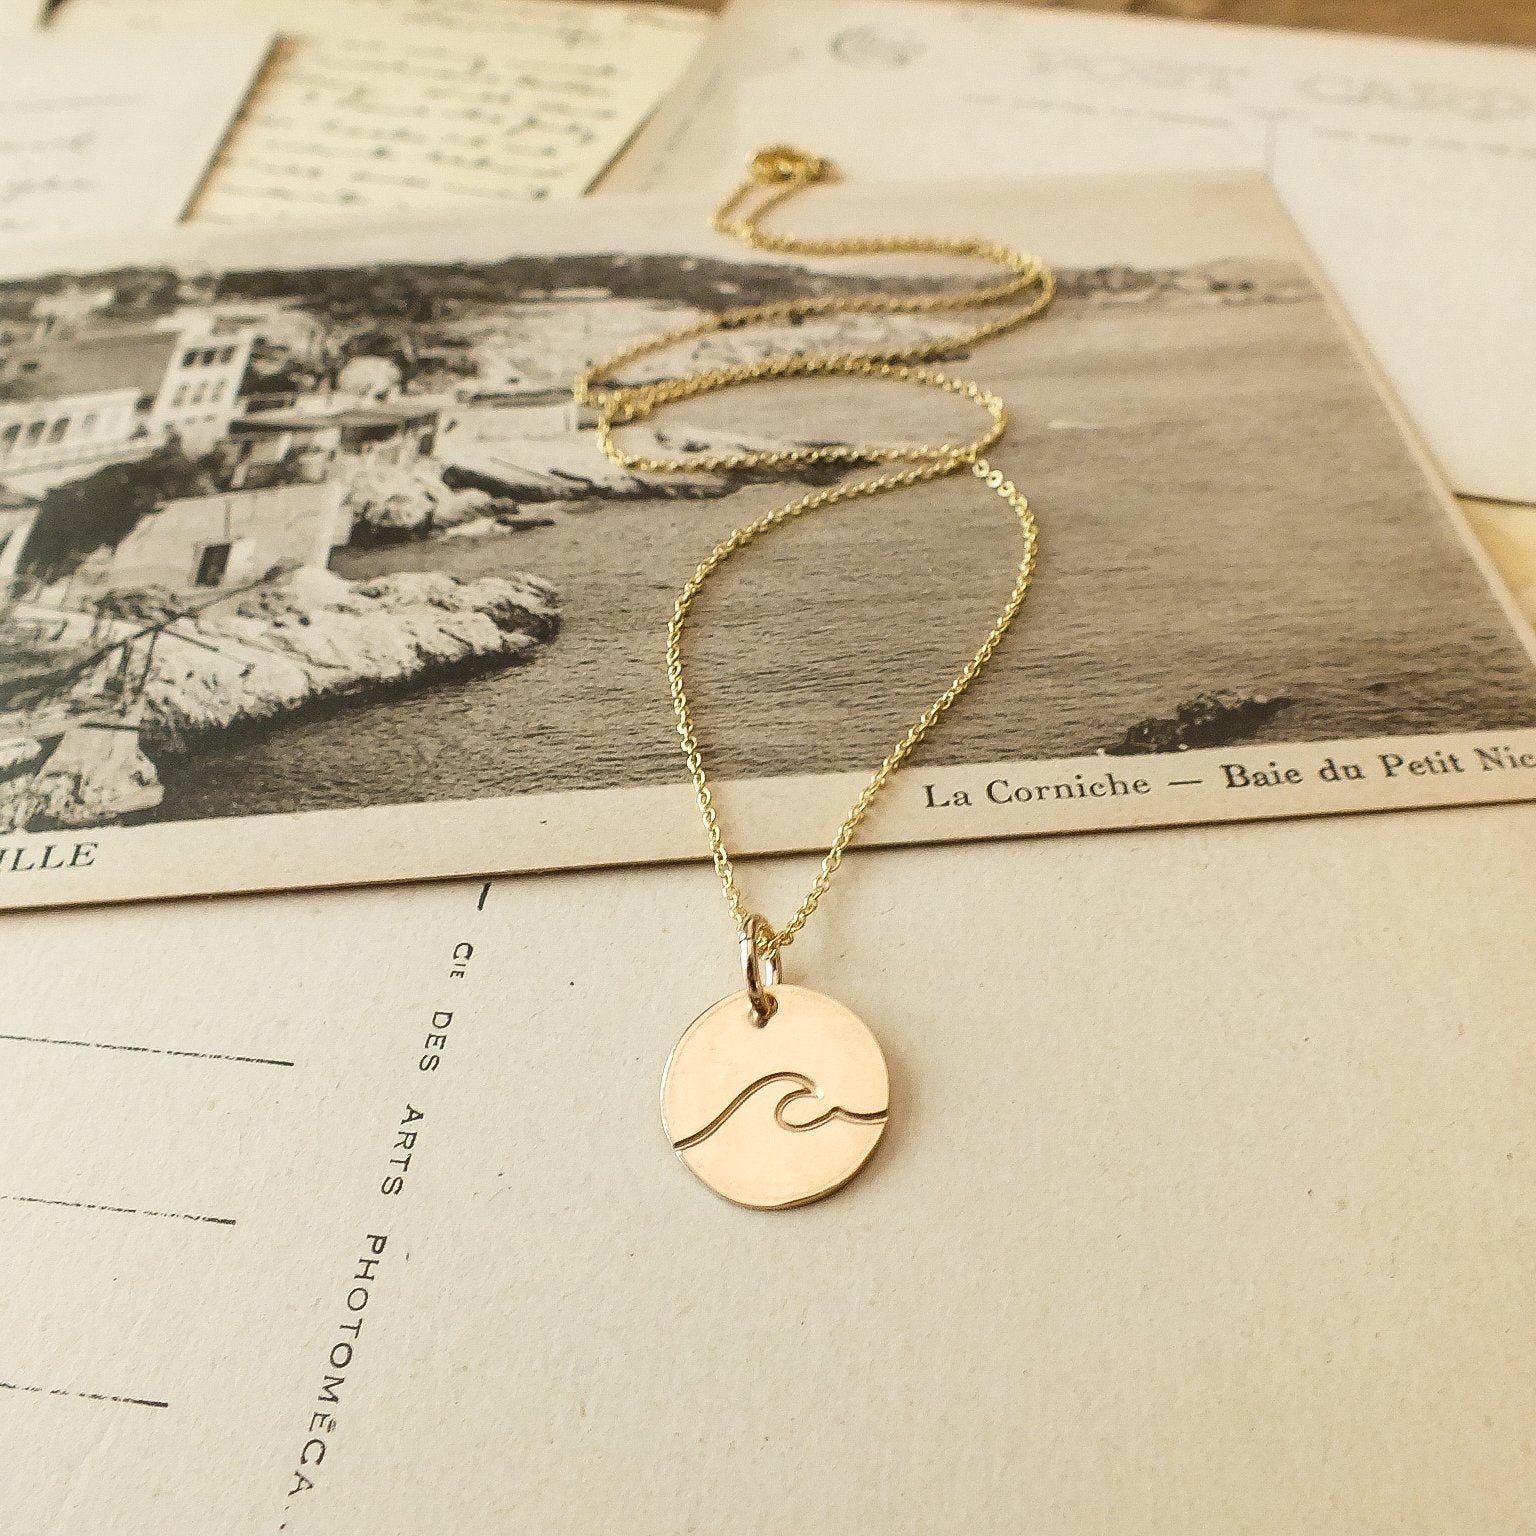 Wave Round Charm Necklace by Becoming Jewelry resting on a vintage postcard featuring a seaside landscape.